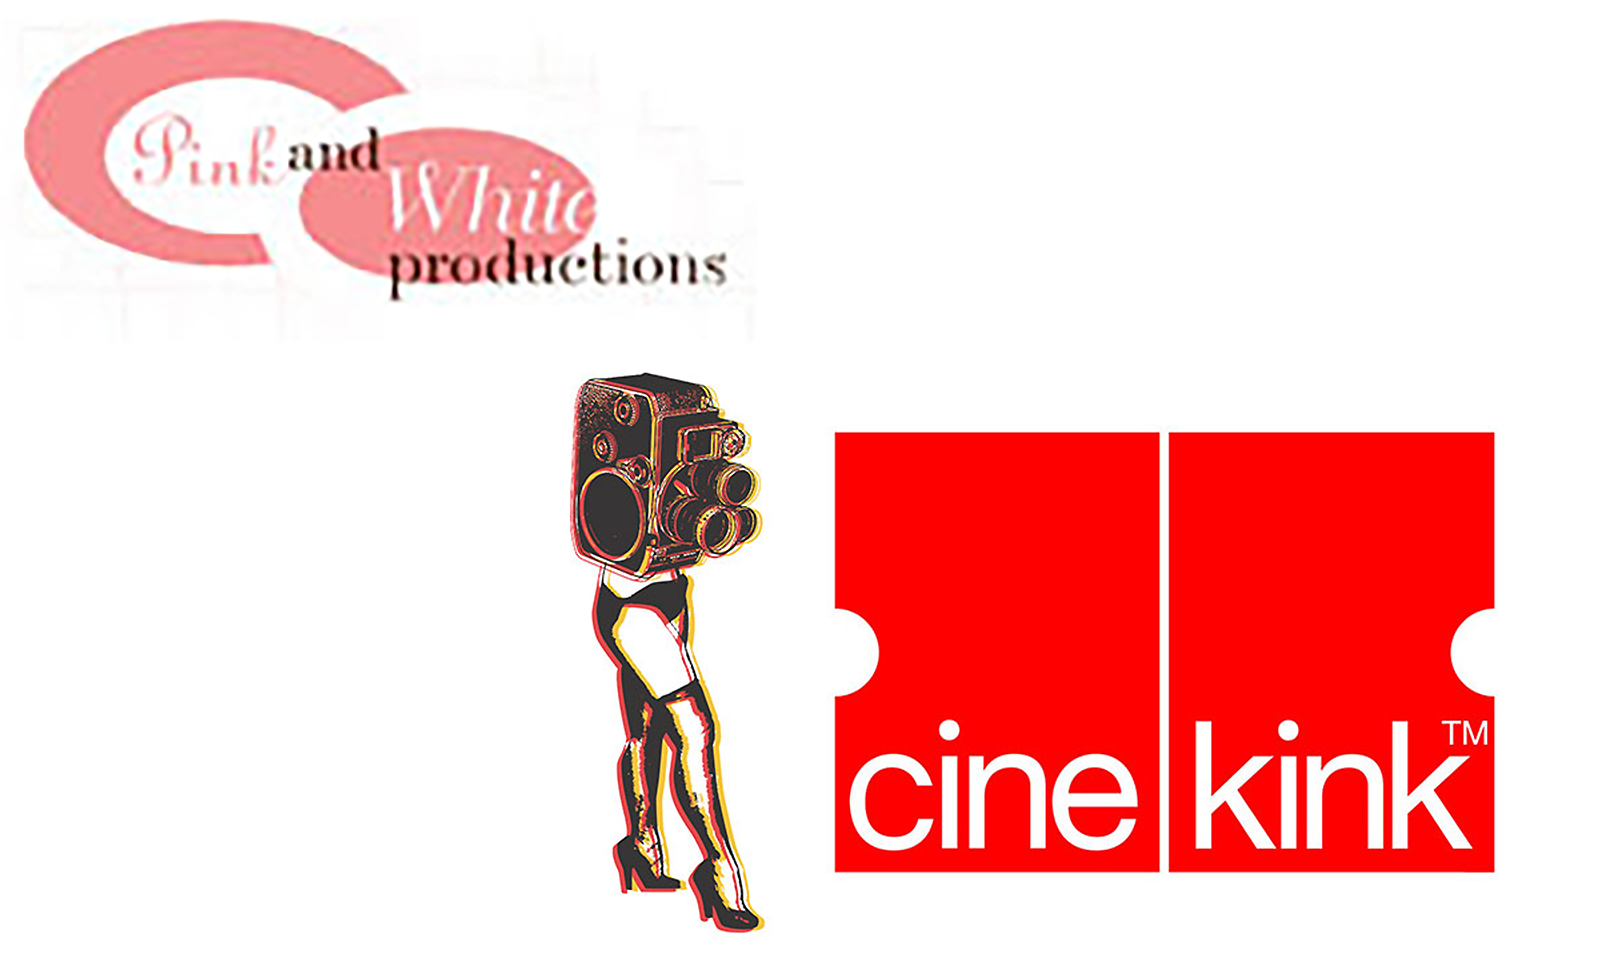 CineKink's First Virtual Festival Will Be Hosted by PinkLabel.TV